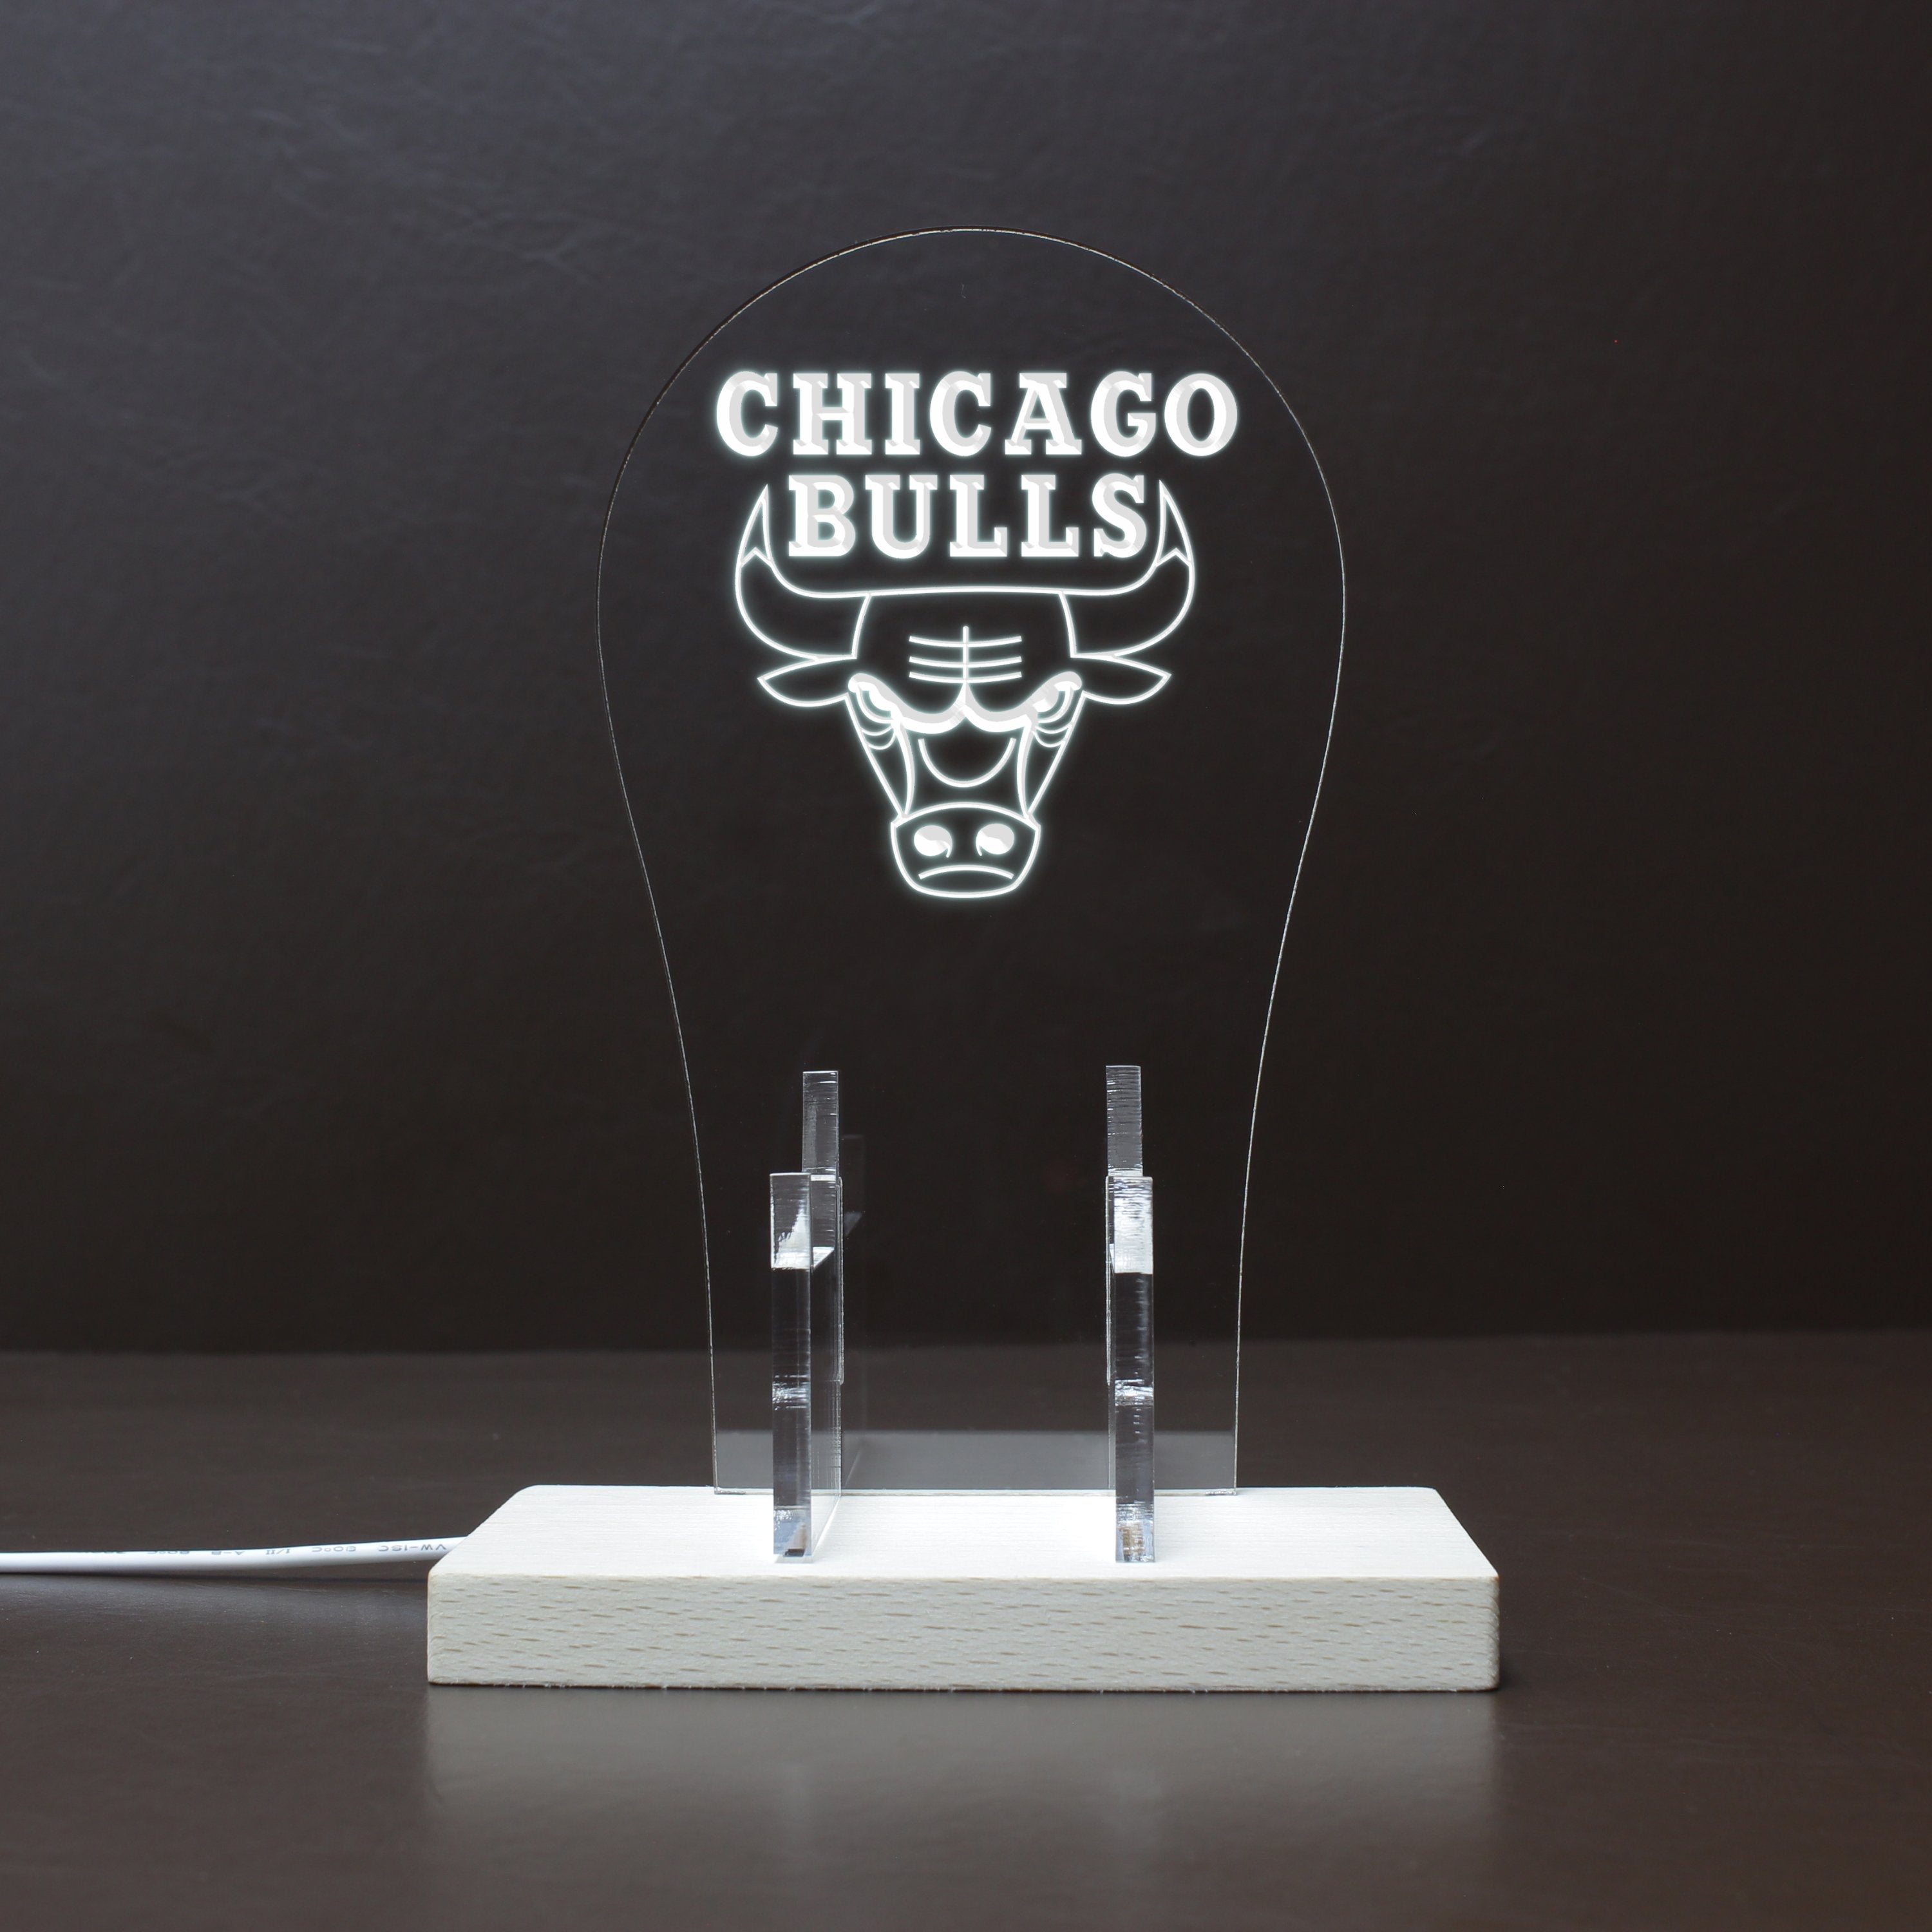 Chicago Bulls LED Gaming Headset Controller Stand